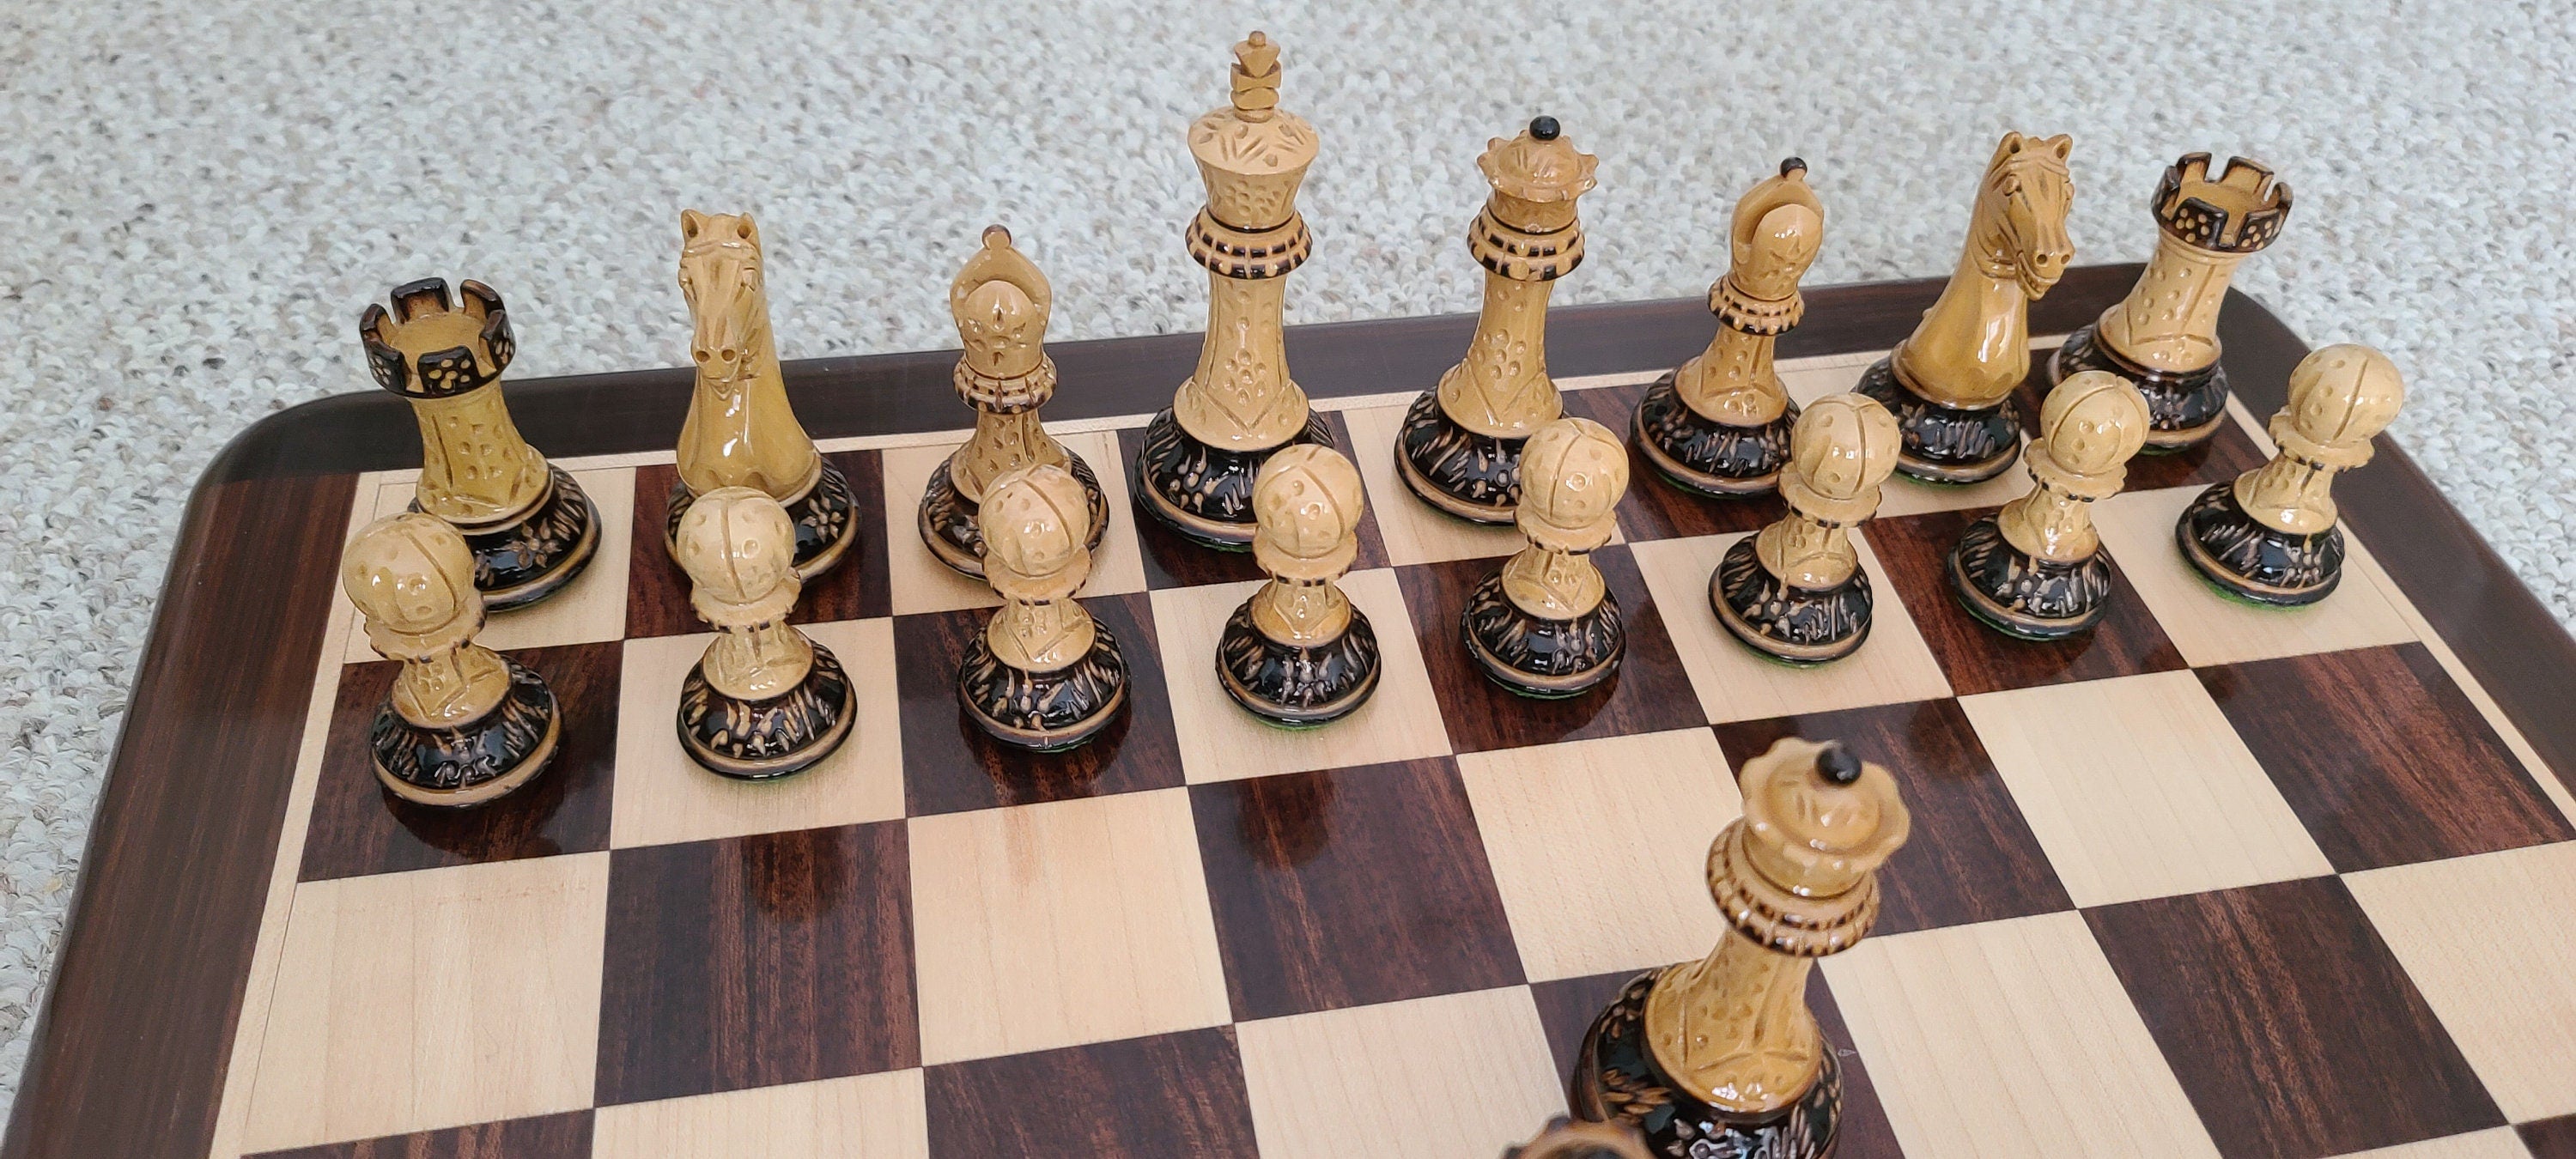 Combo Chess Set Anjan Wood Board with Handcarved Burnt Staunton Style Club Series Tournament Chess set Combo (Board + Pieces)